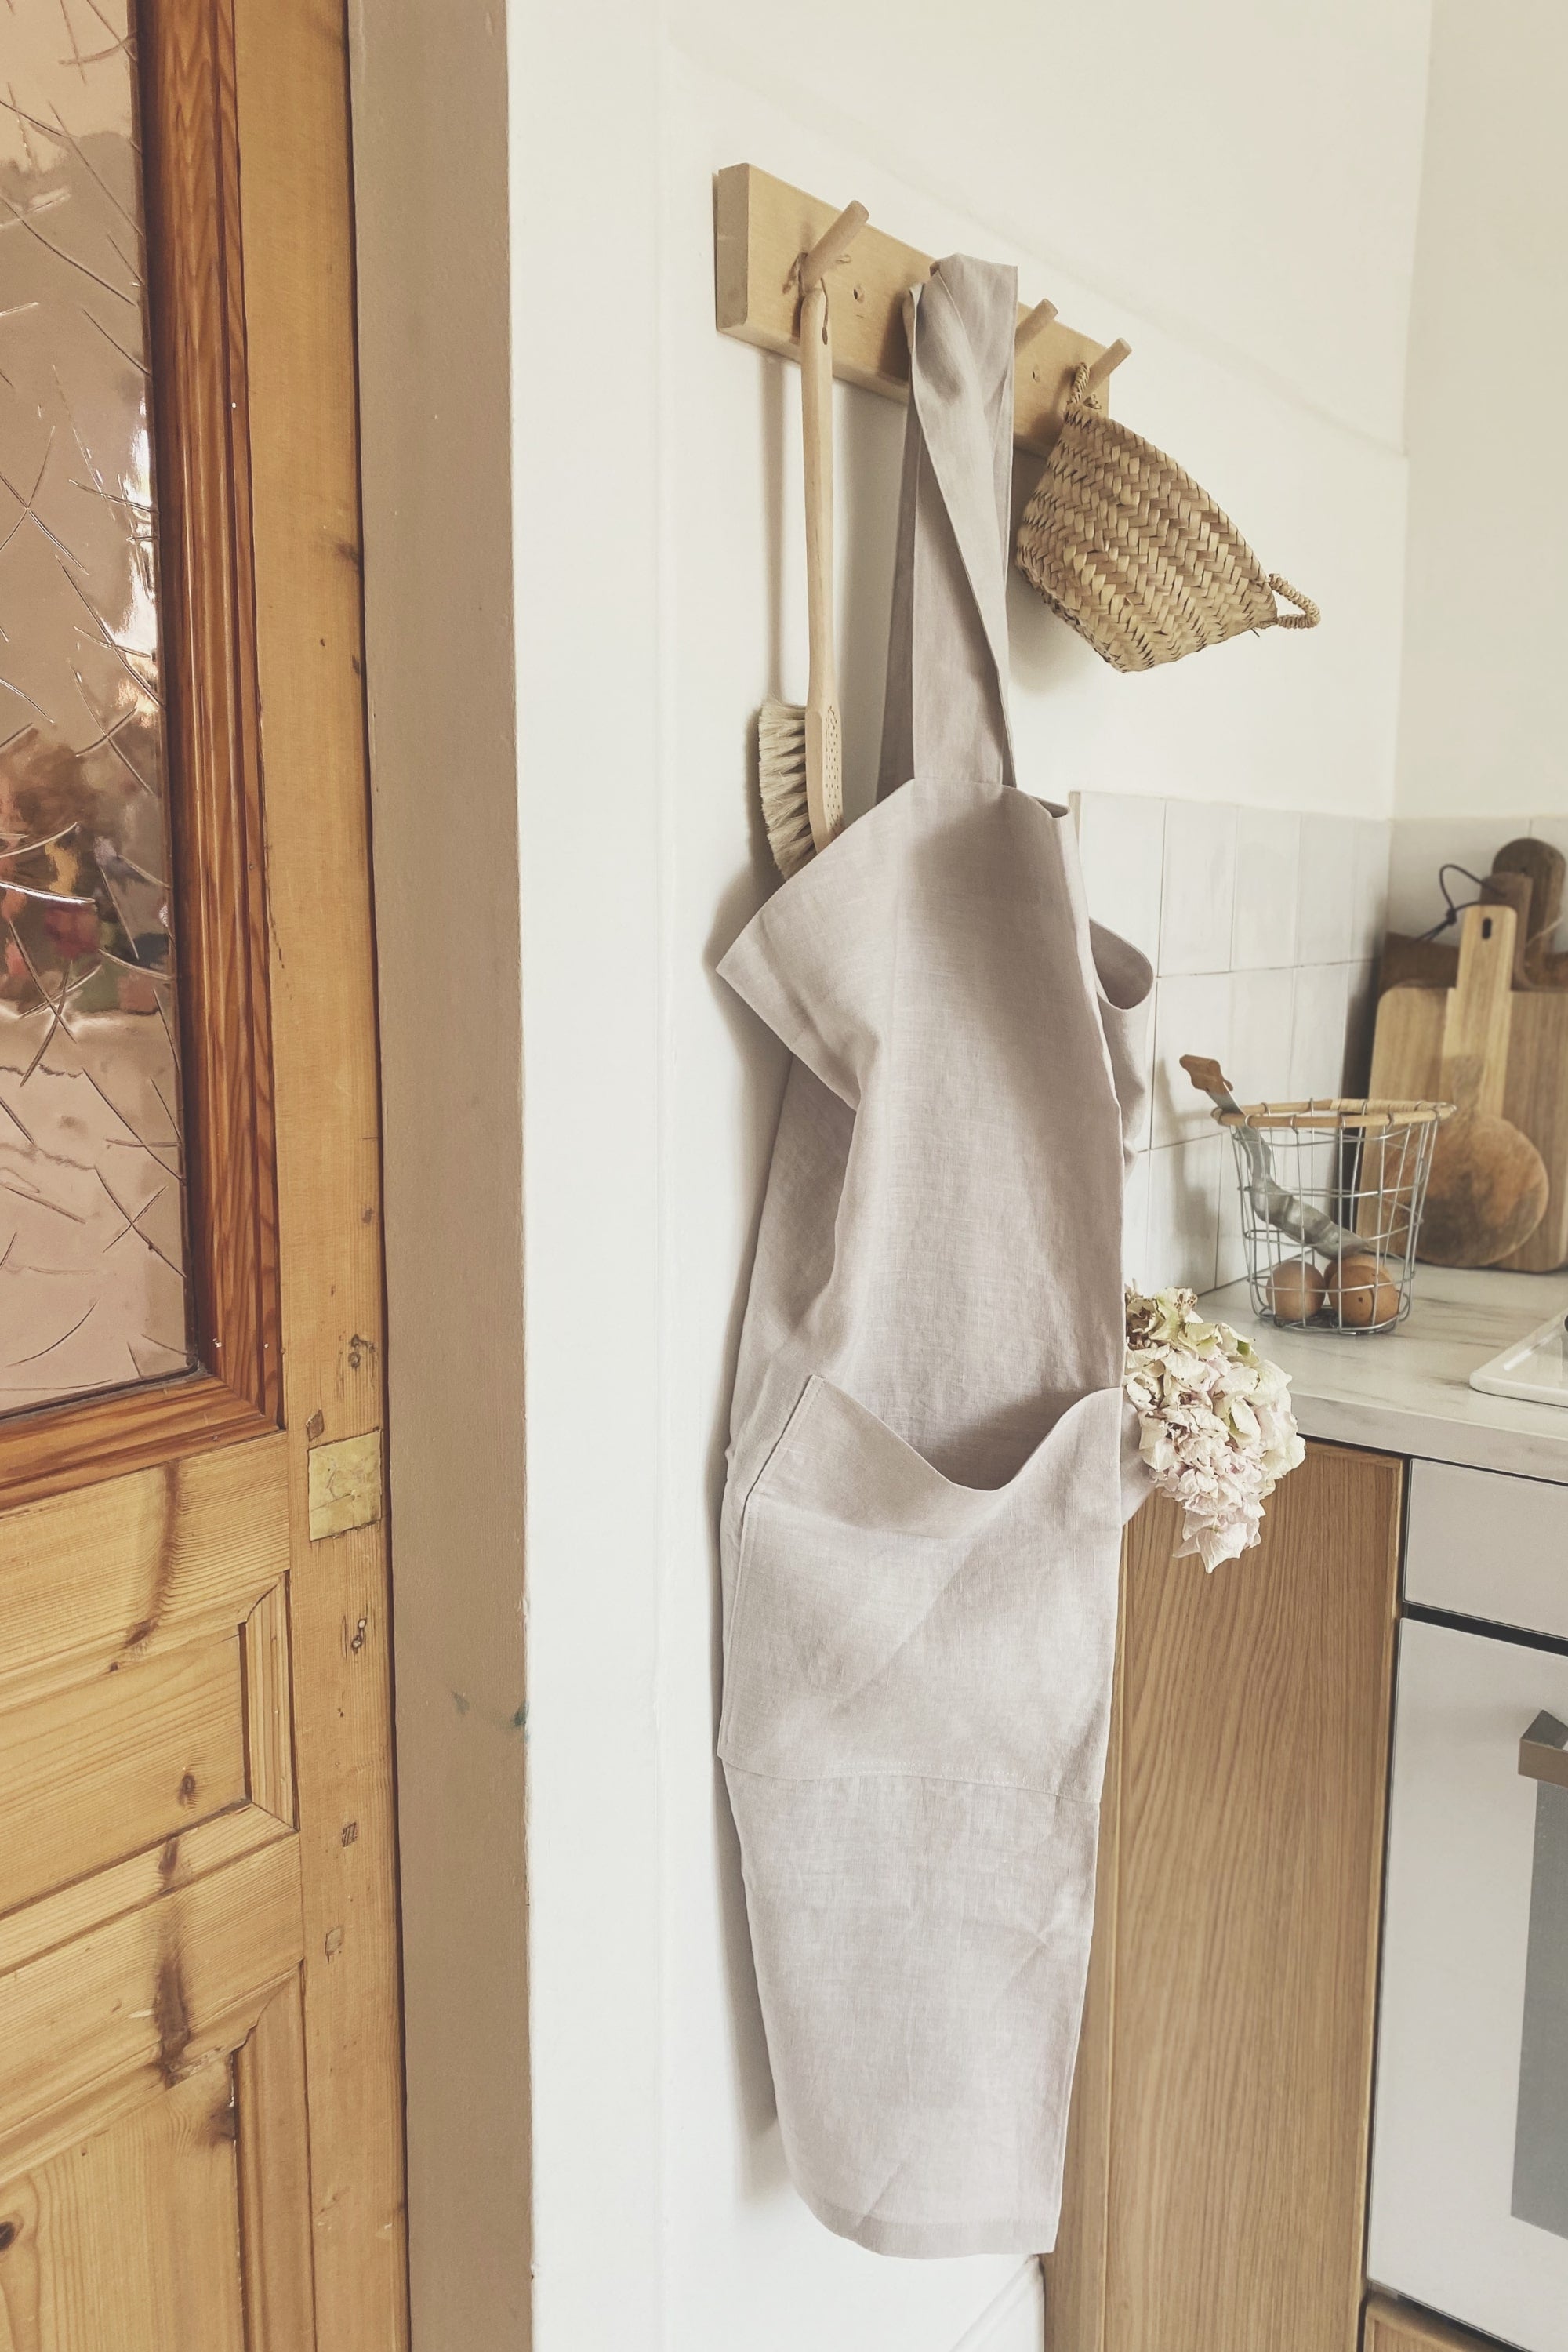 Japnese Linen Apron In Cream Hanging on wall By Amourlinen